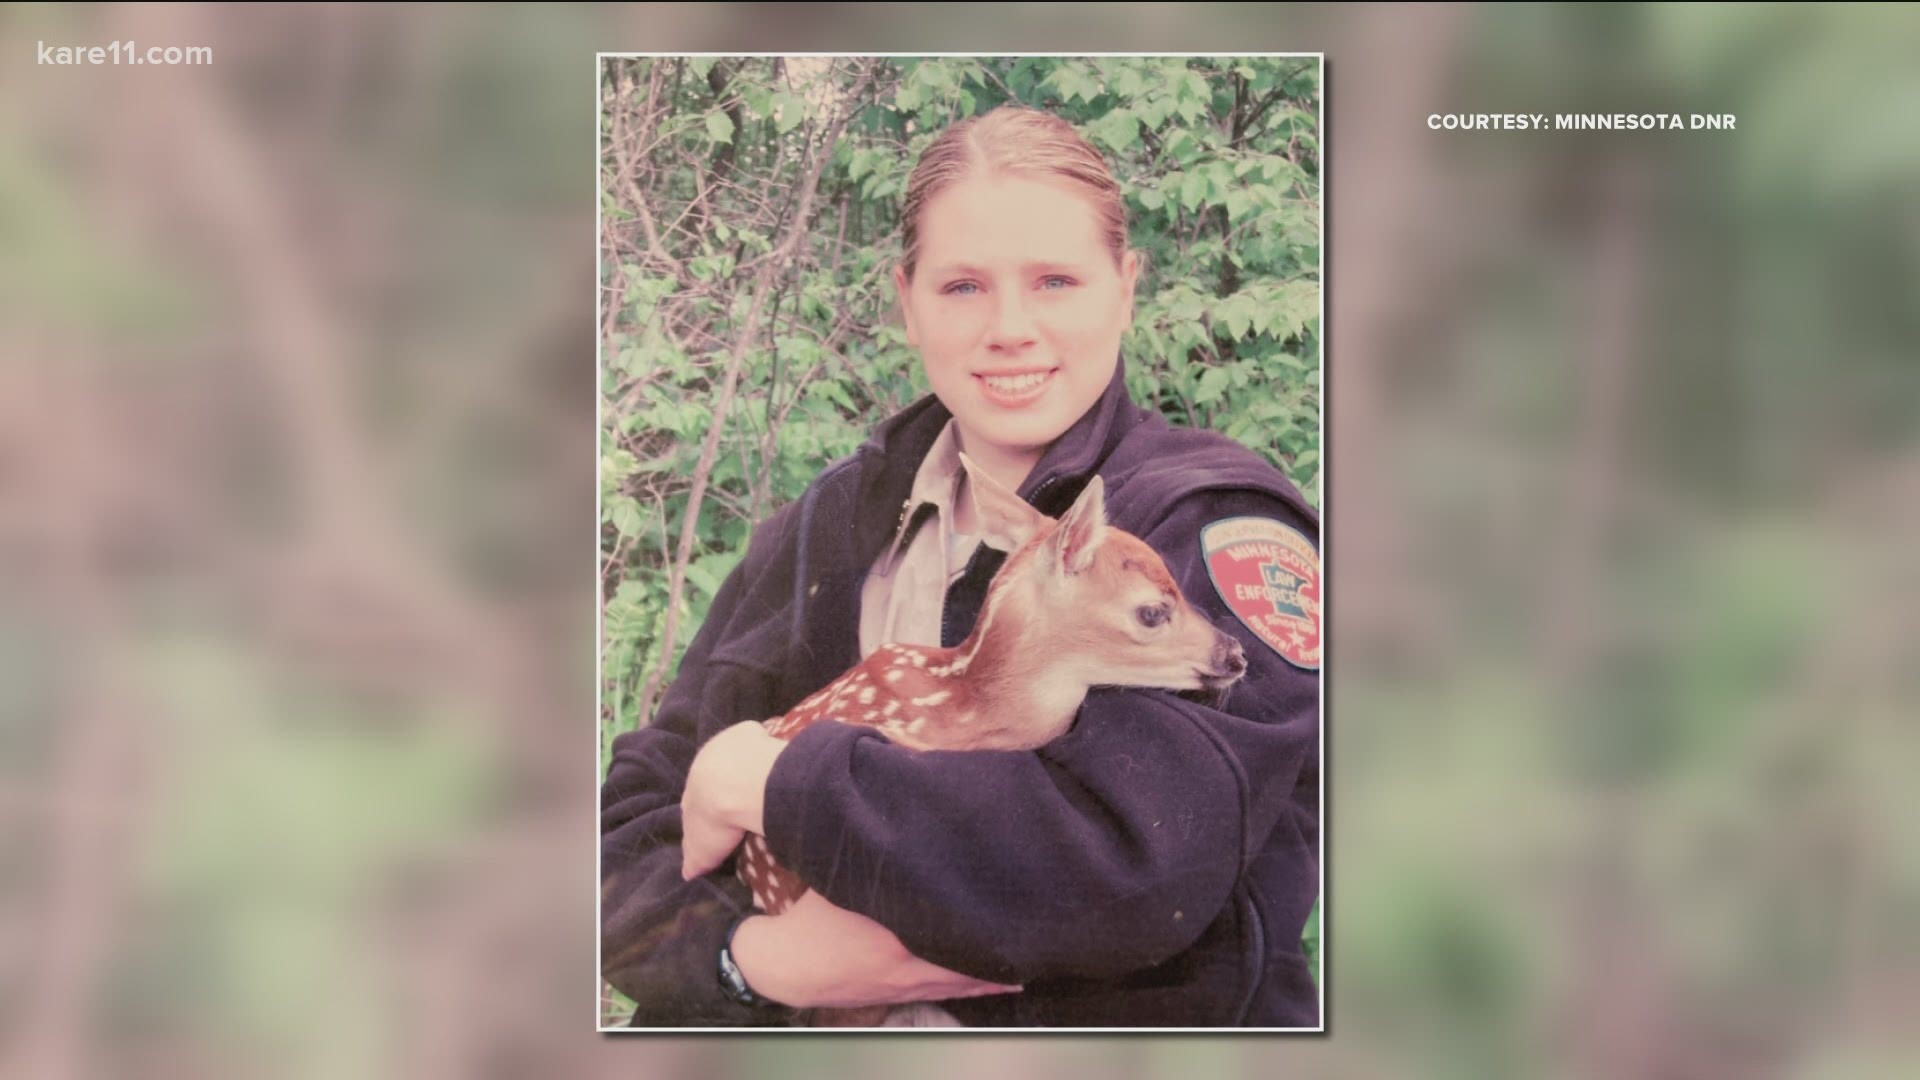 The Minnesota DNR says it's dealing with an indescribable sense of loss after one of its own officers, Sarah Grell, died in a crash Monday.